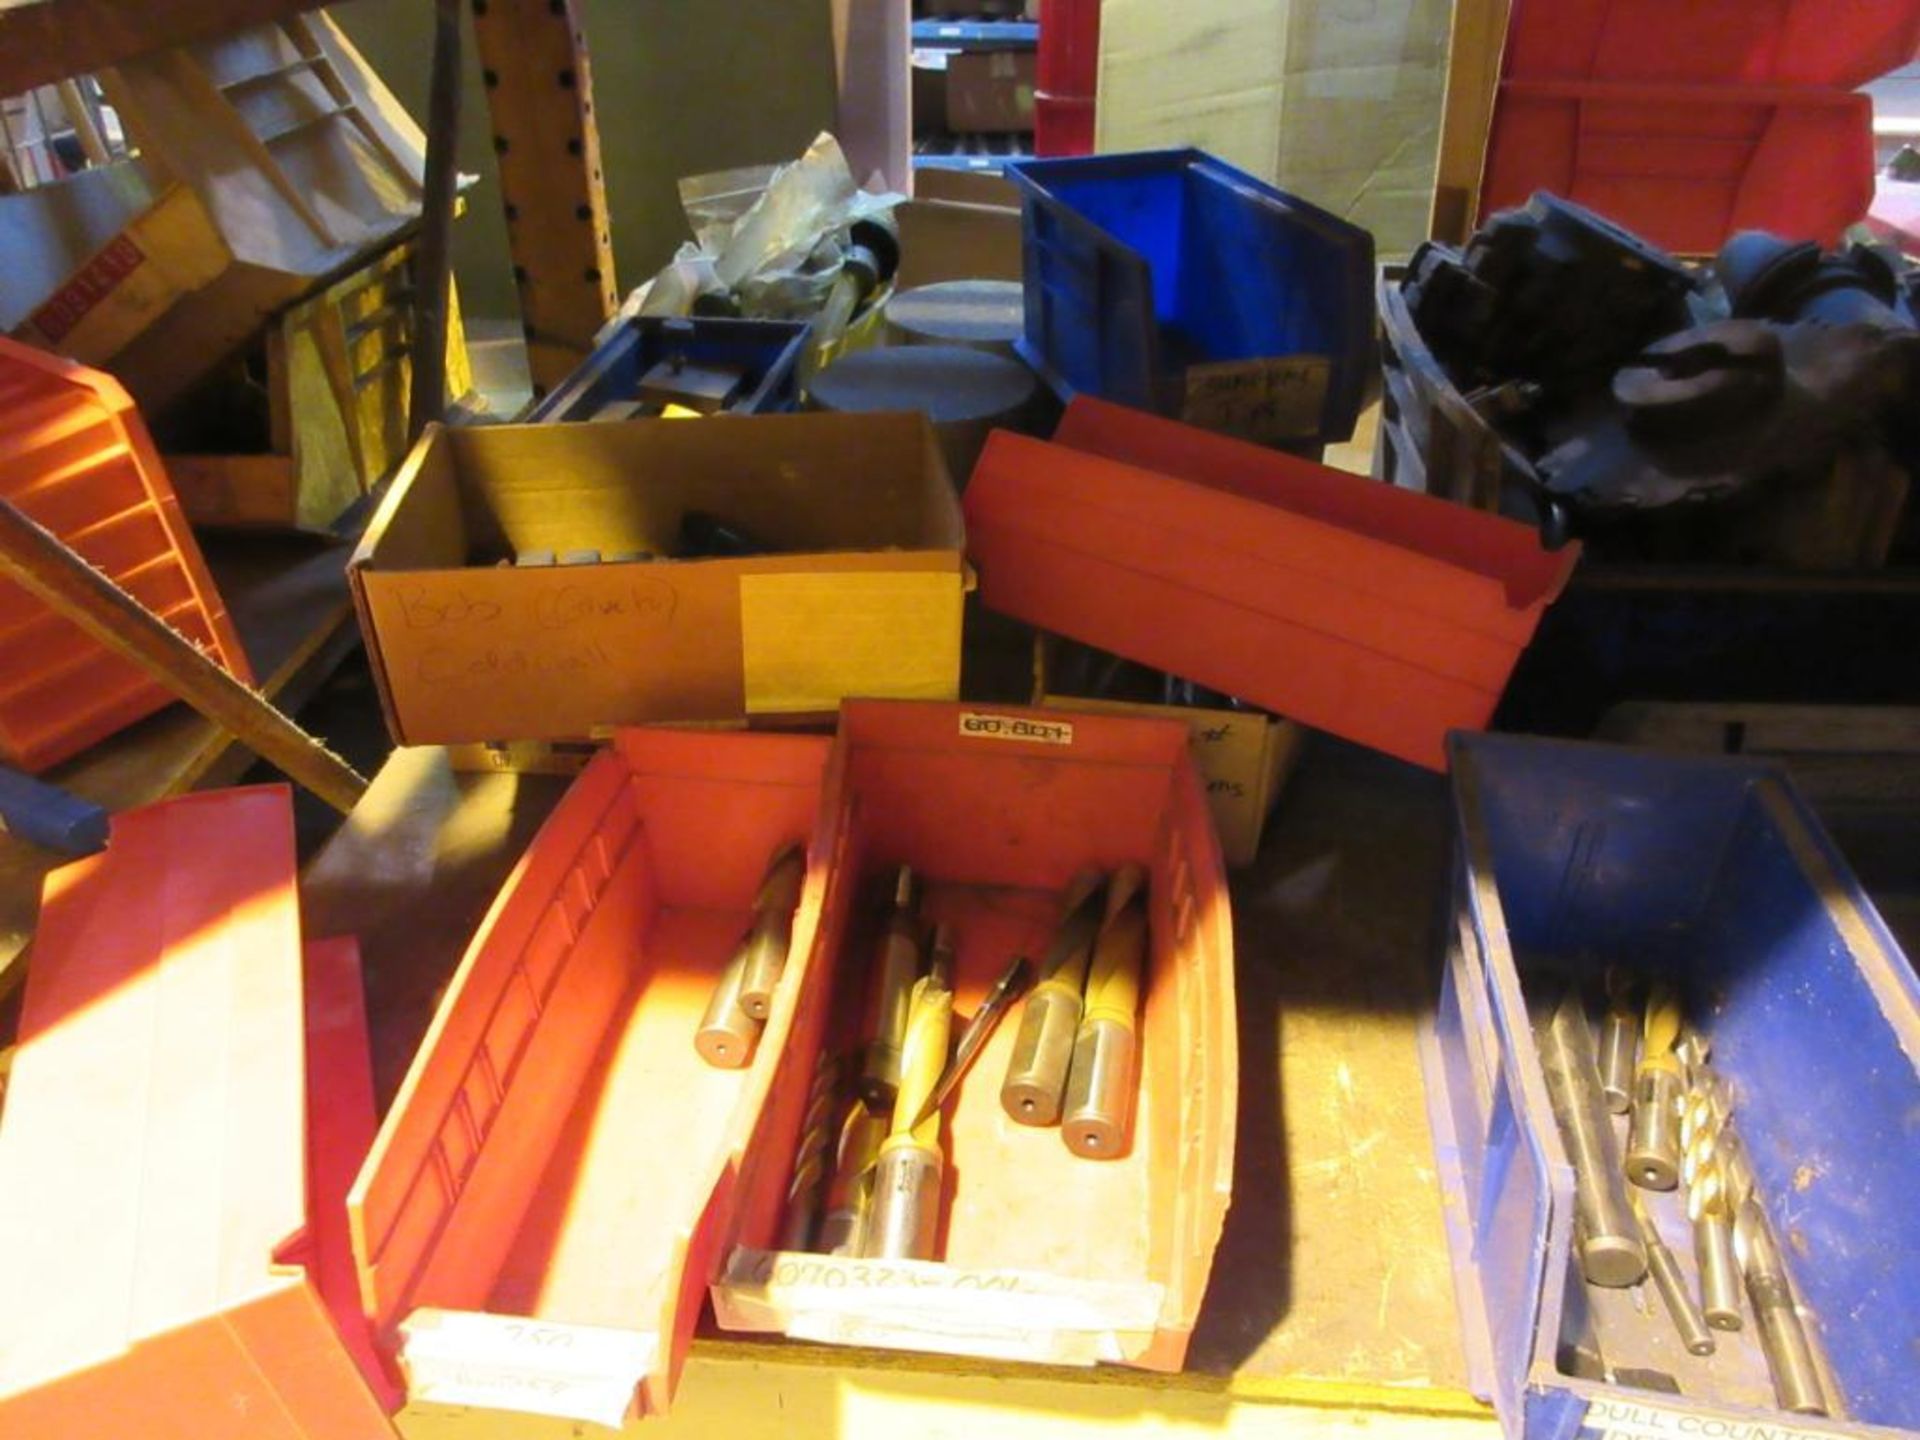 CONTENTS OF (22) SECTIONS PALLET RACK: ASSORTED ABRASIVES, SUNNEN STONES, TOOL BITS, DOVETAIL CUTTER - Image 35 of 43